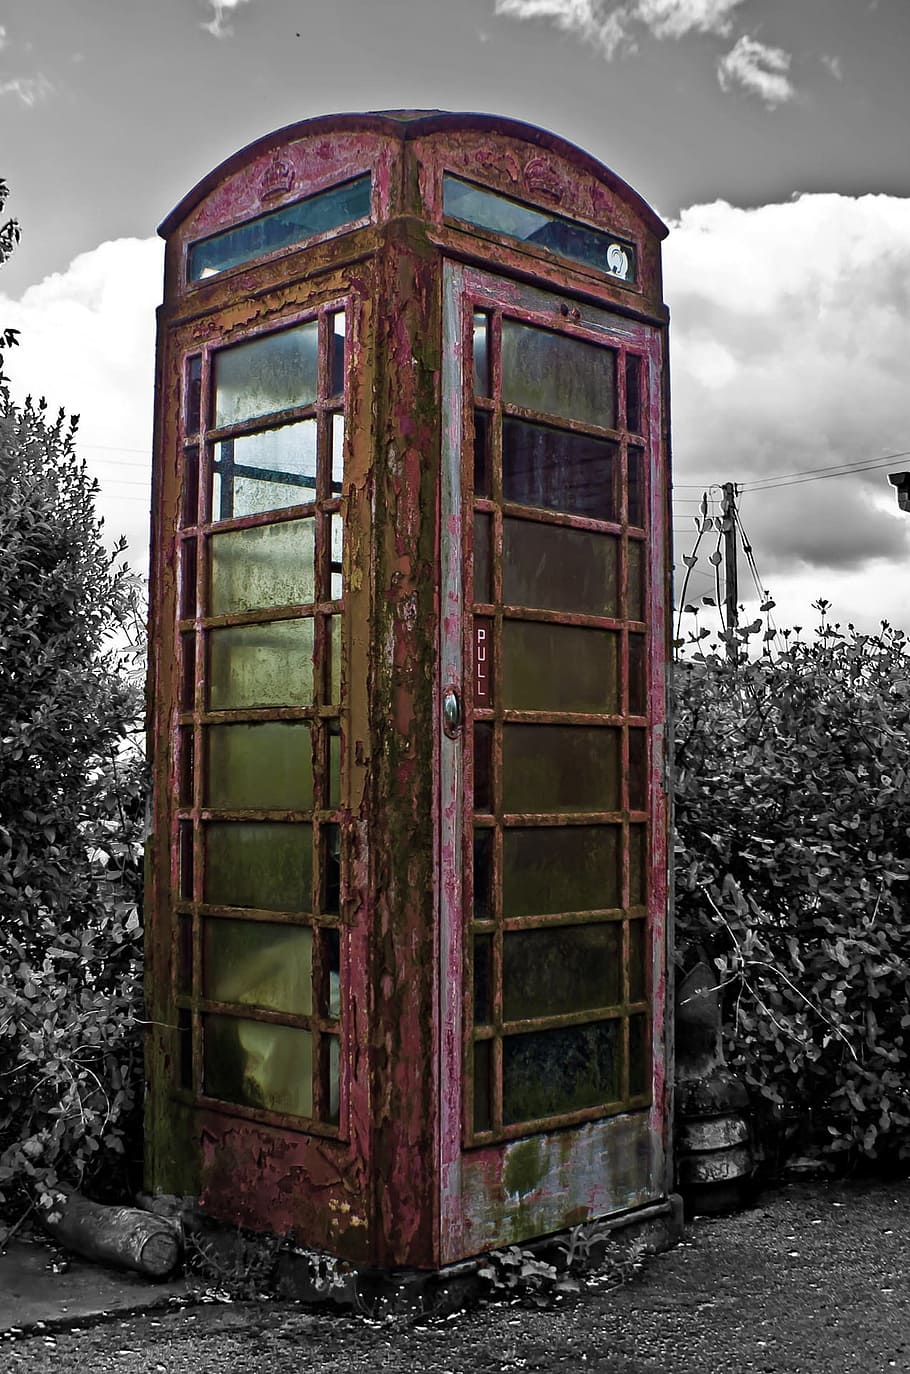 HD wallpaper: Old, Phone, Booth, Traditions, architecture, england,  background | Wallpaper Flare